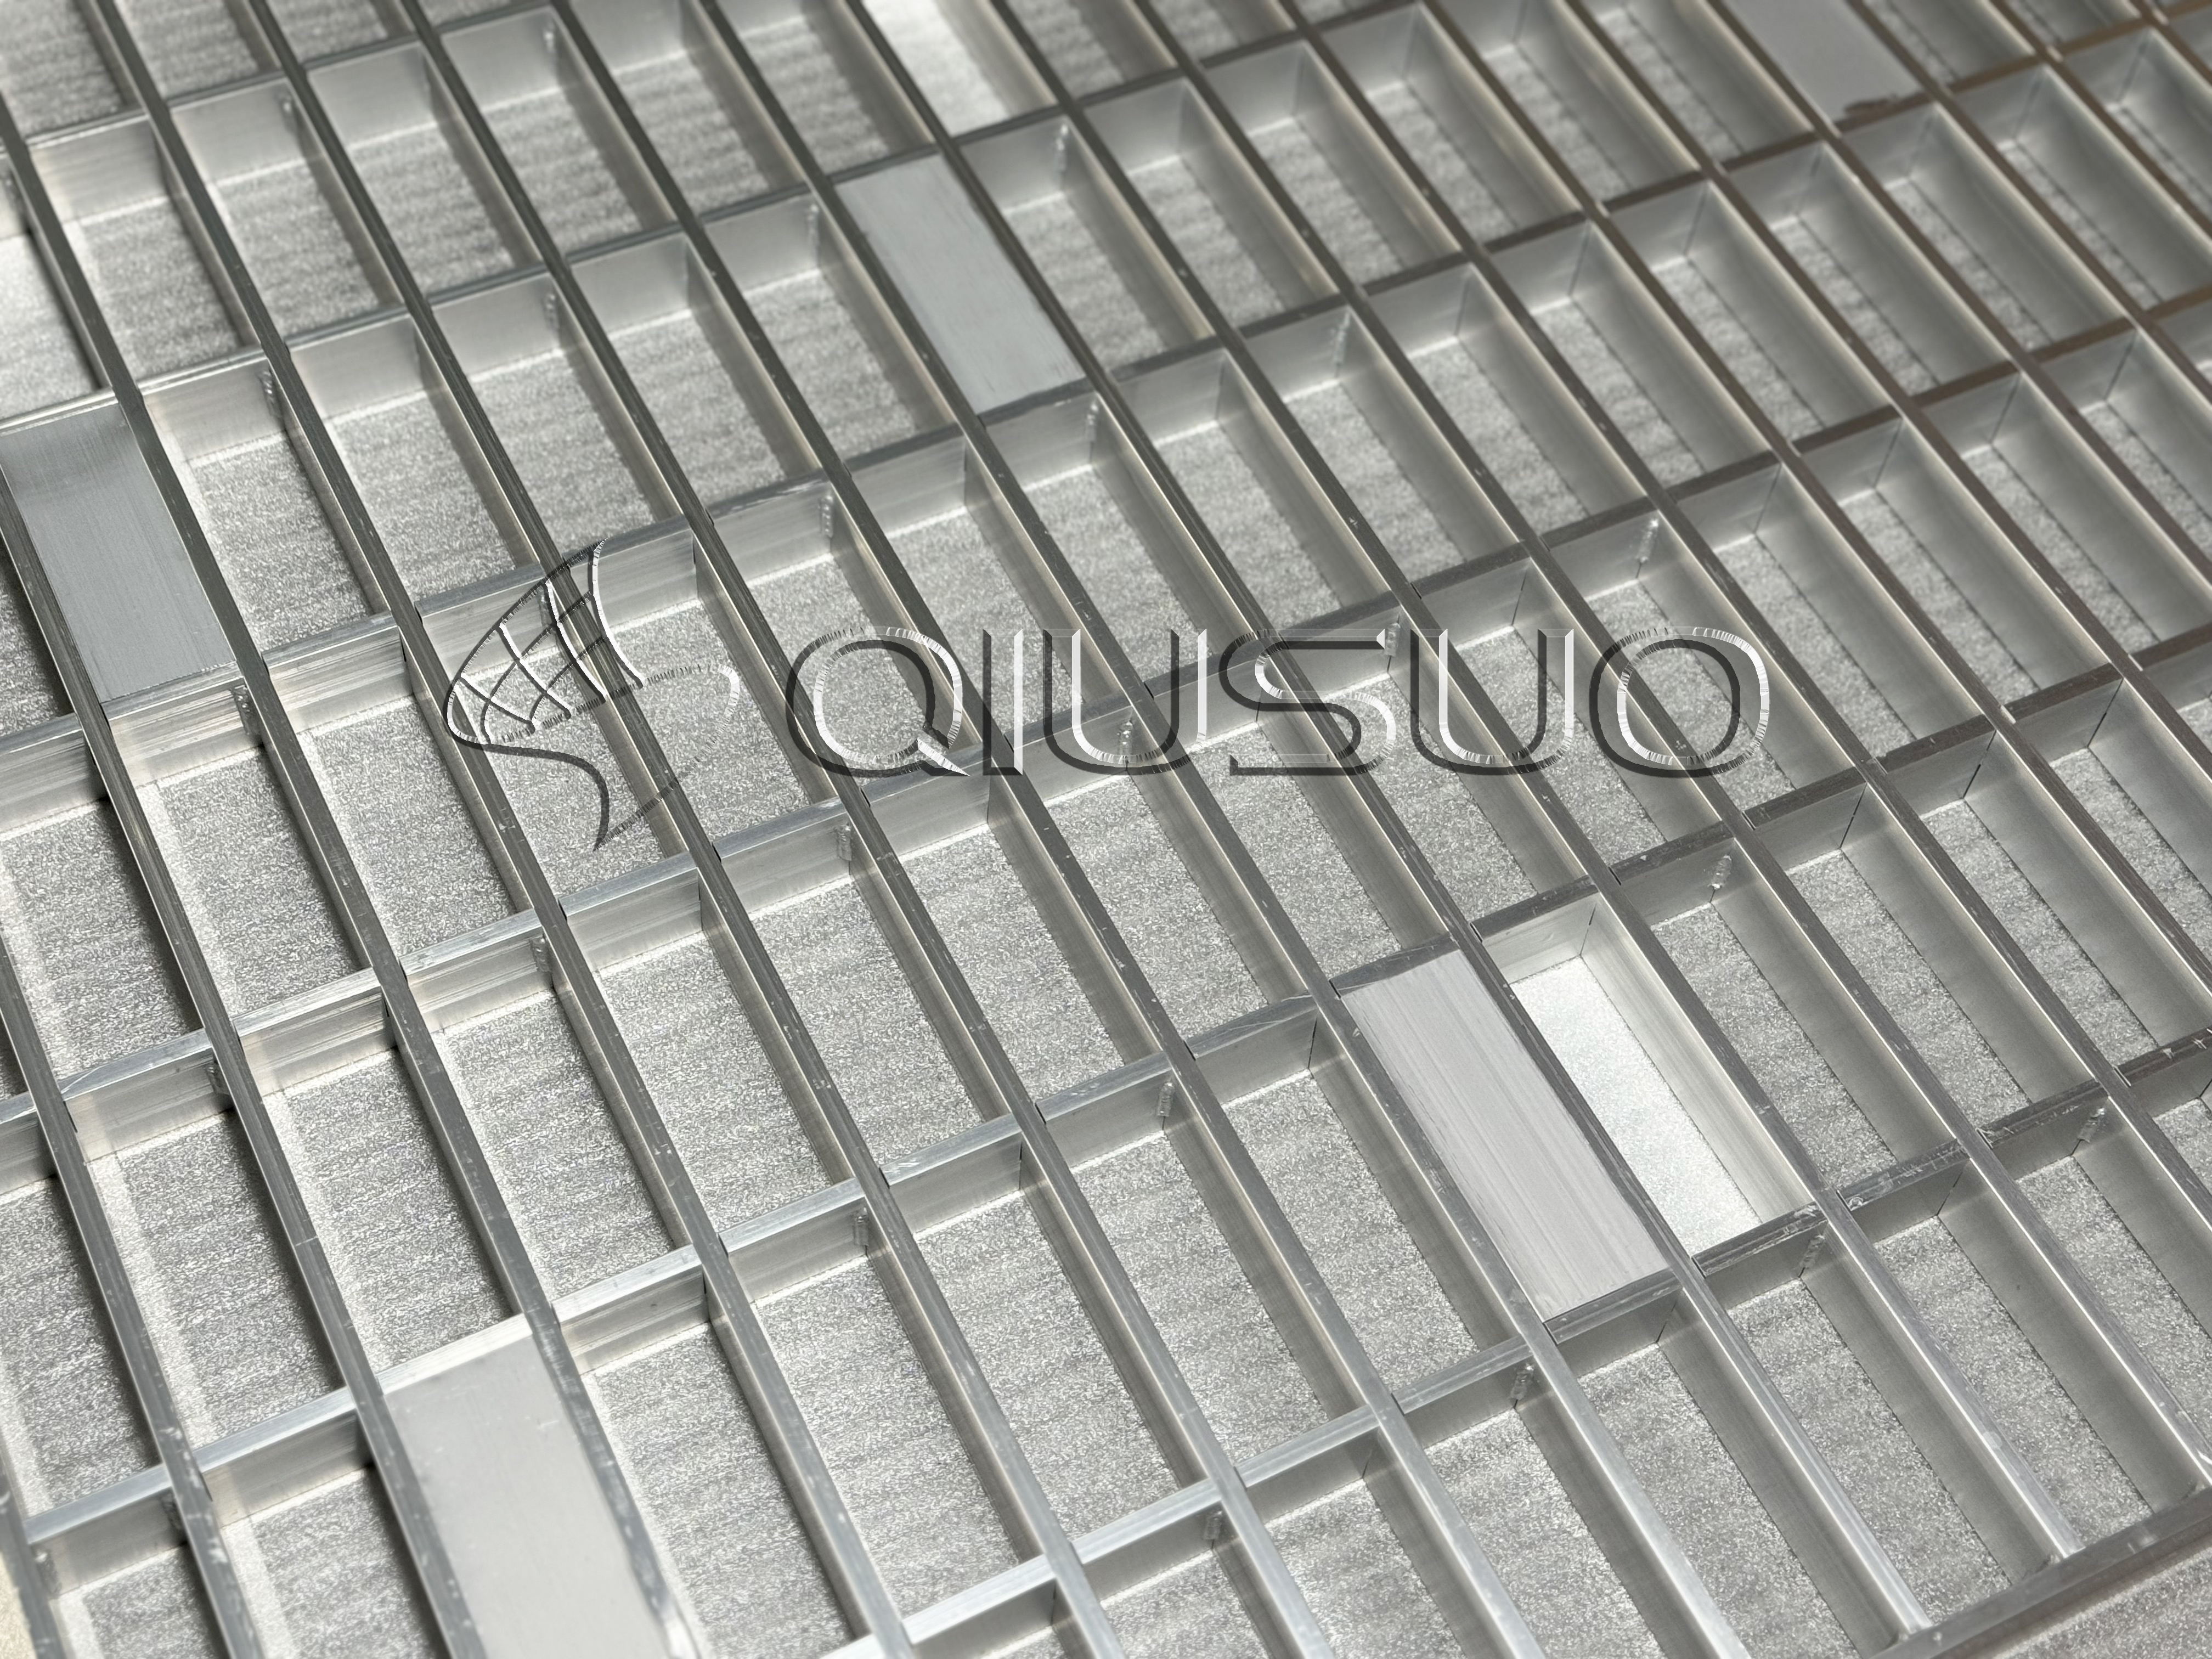 This is a close-up view picture of  6061 anodized aluminum bar grating.